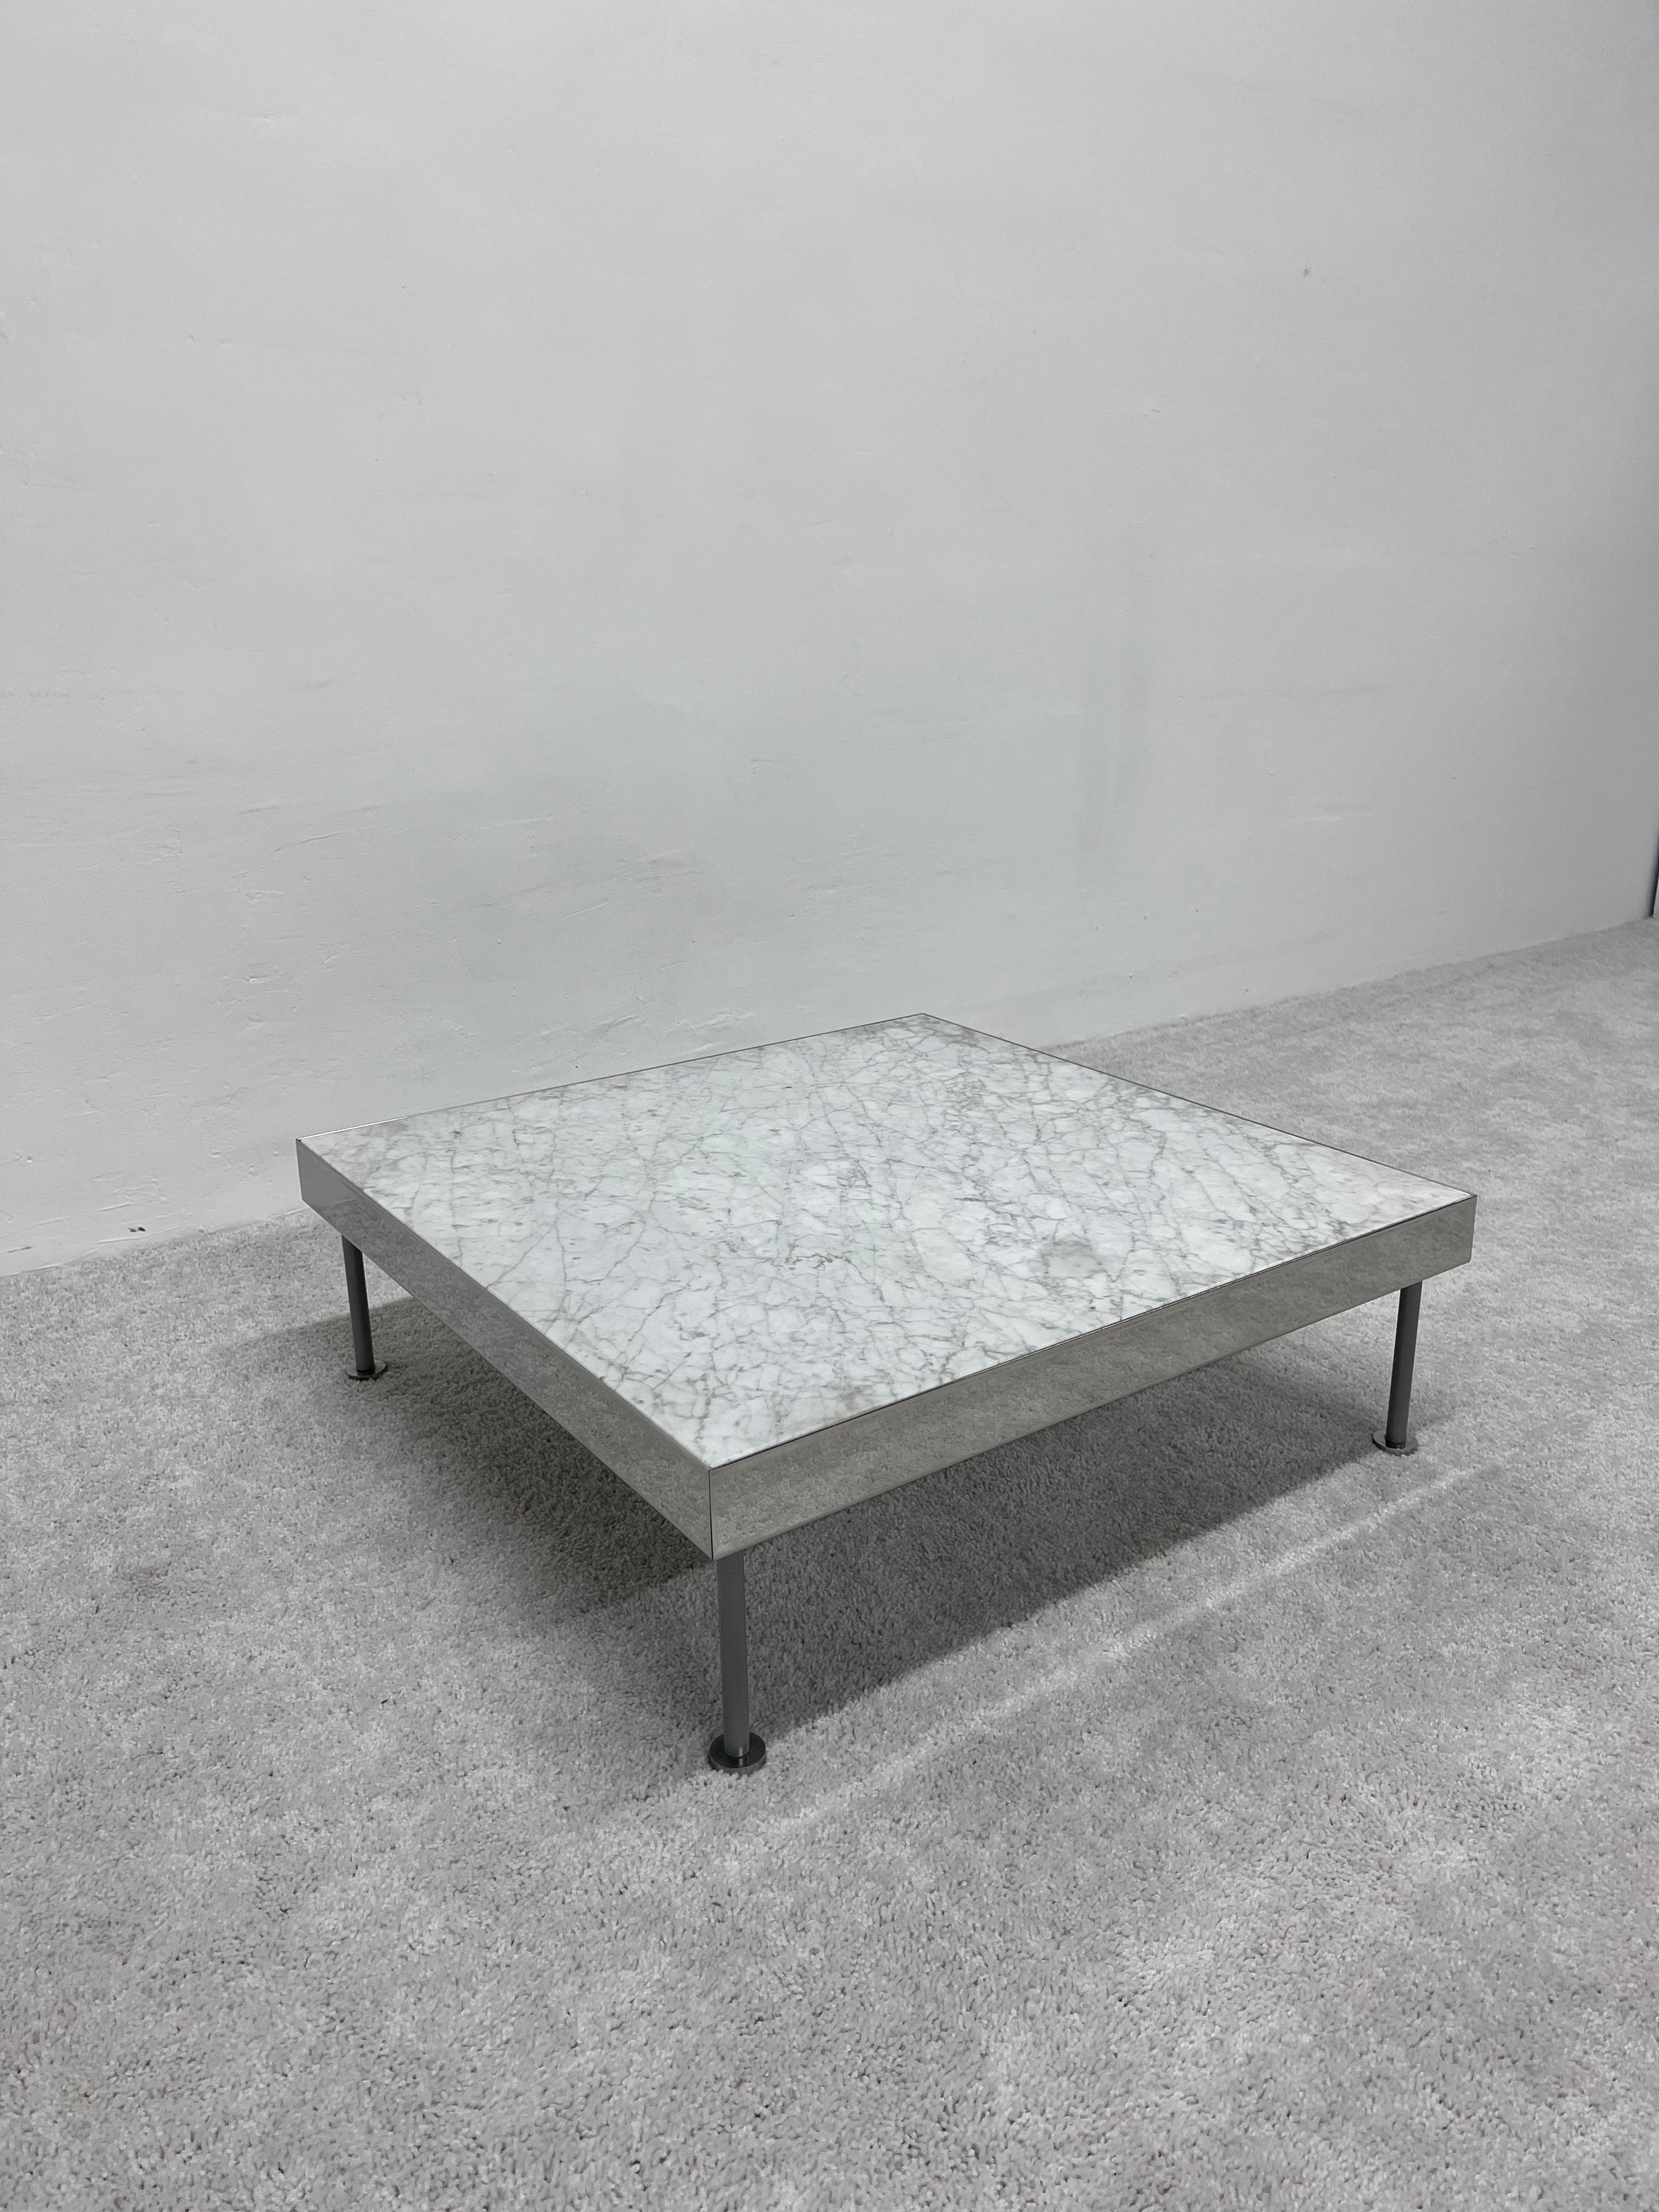 Post-Modern Contemporary Carrara Marble and Polished Steel Low Coffee Table, 1980s For Sale